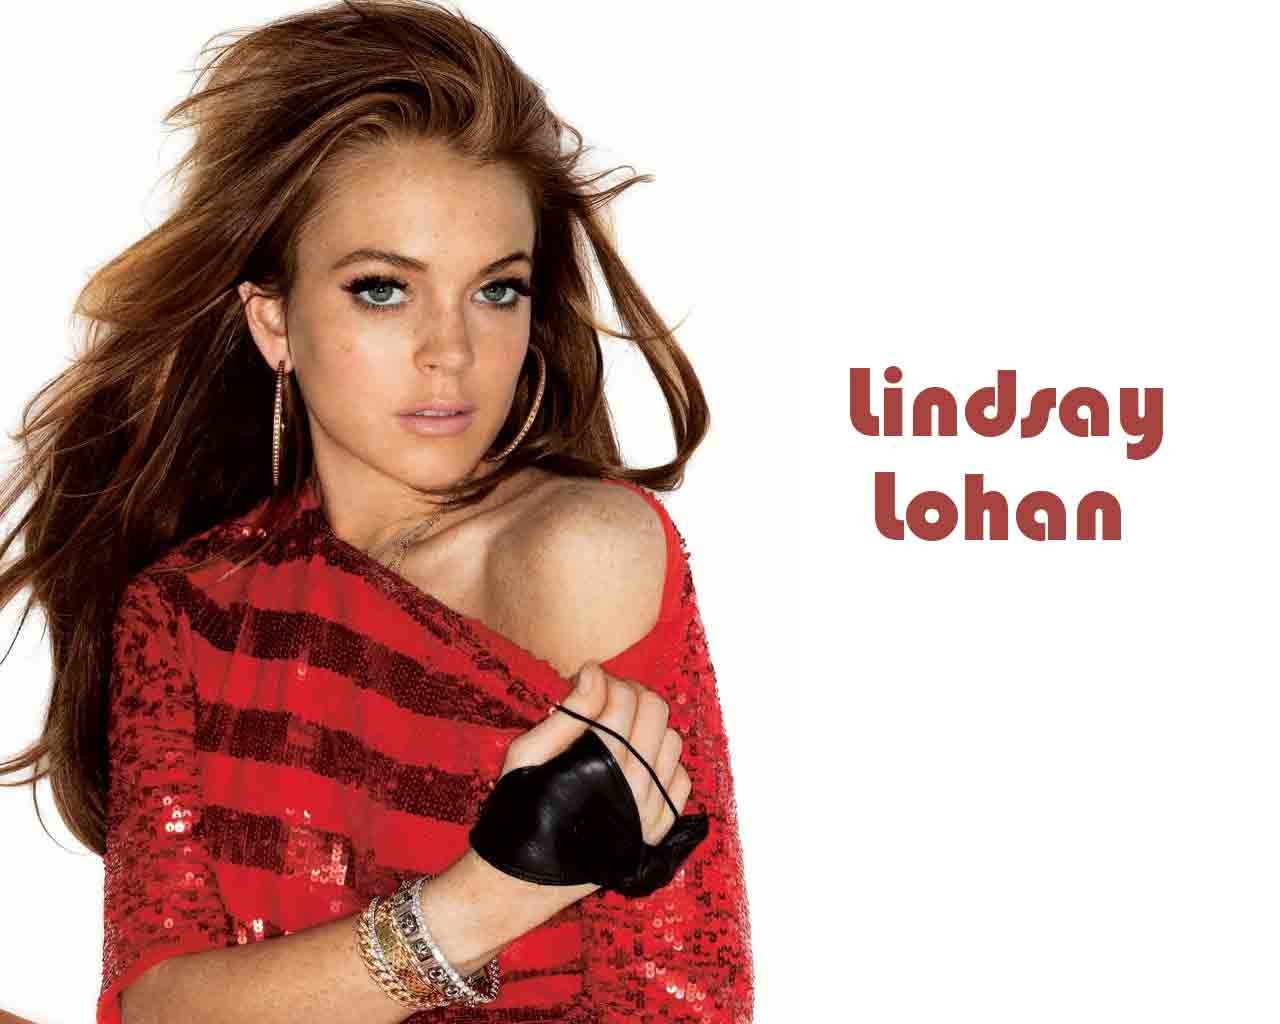 Lindsay Lohan Picture